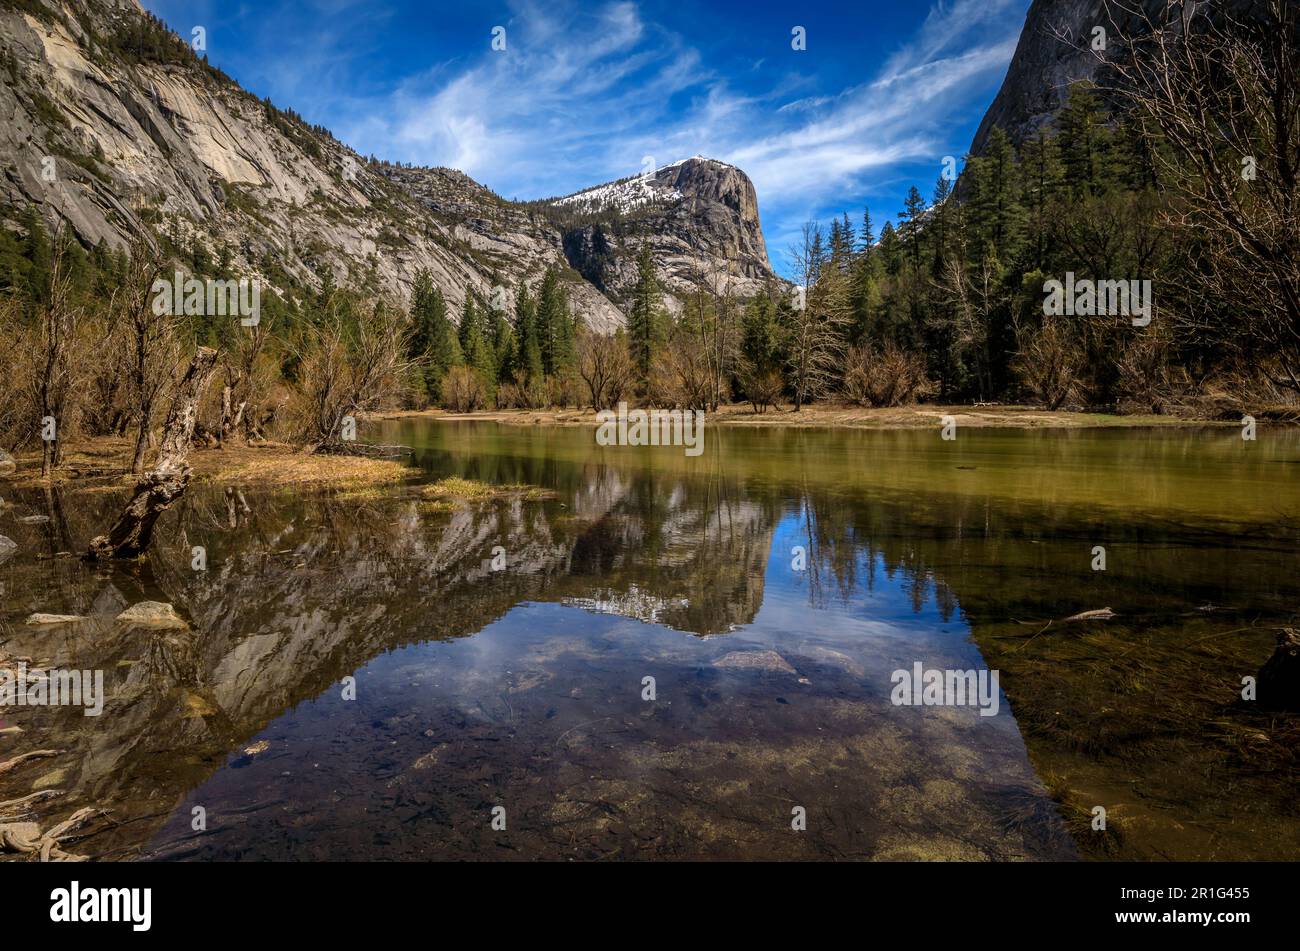 Mirror Lake full after snow melt in the spring, North Dome reflections, in the Yosemite National Park, Sierra Nevada mountain range in California, USA Stock Photo